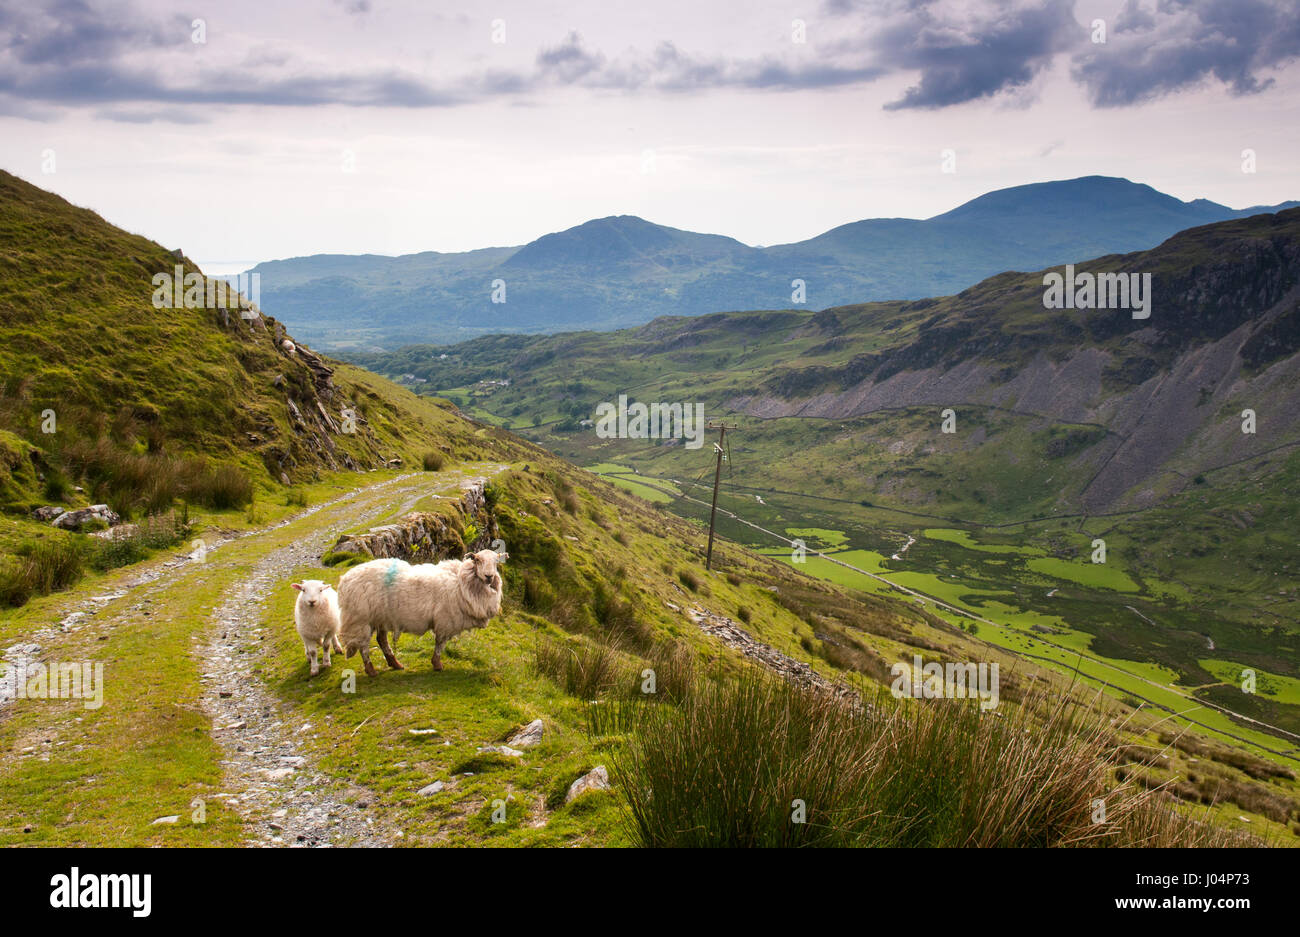 Sheep on the incline track that leads to Croesor Quarry on the side of Moelwyn Mawr mountain in Snowdonia National Park. Stock Photo